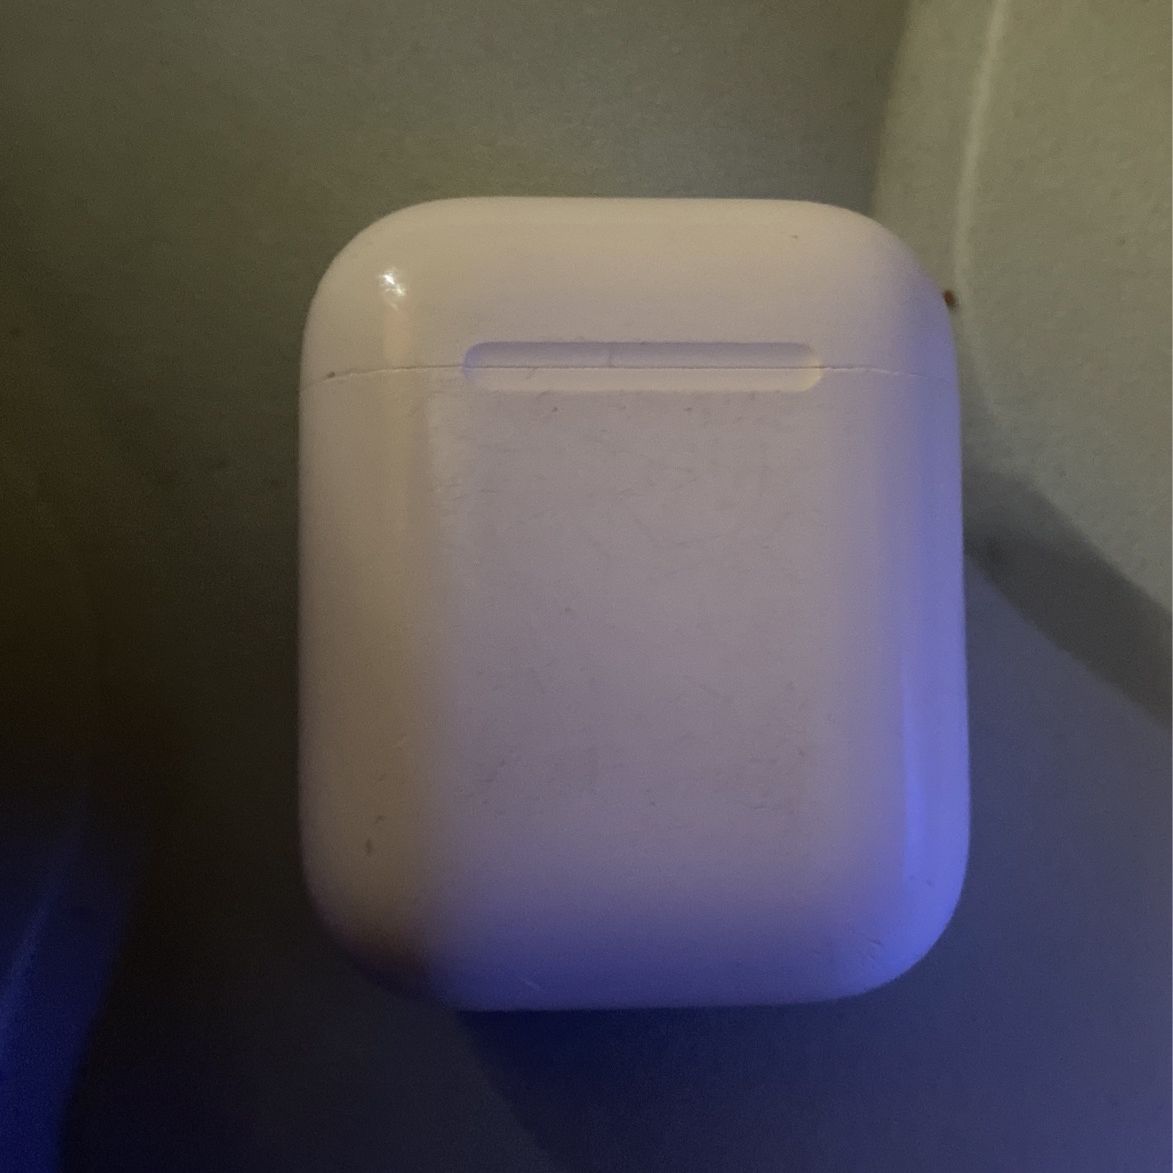 Apple AirPods 1st Gen With Charging Case In White 